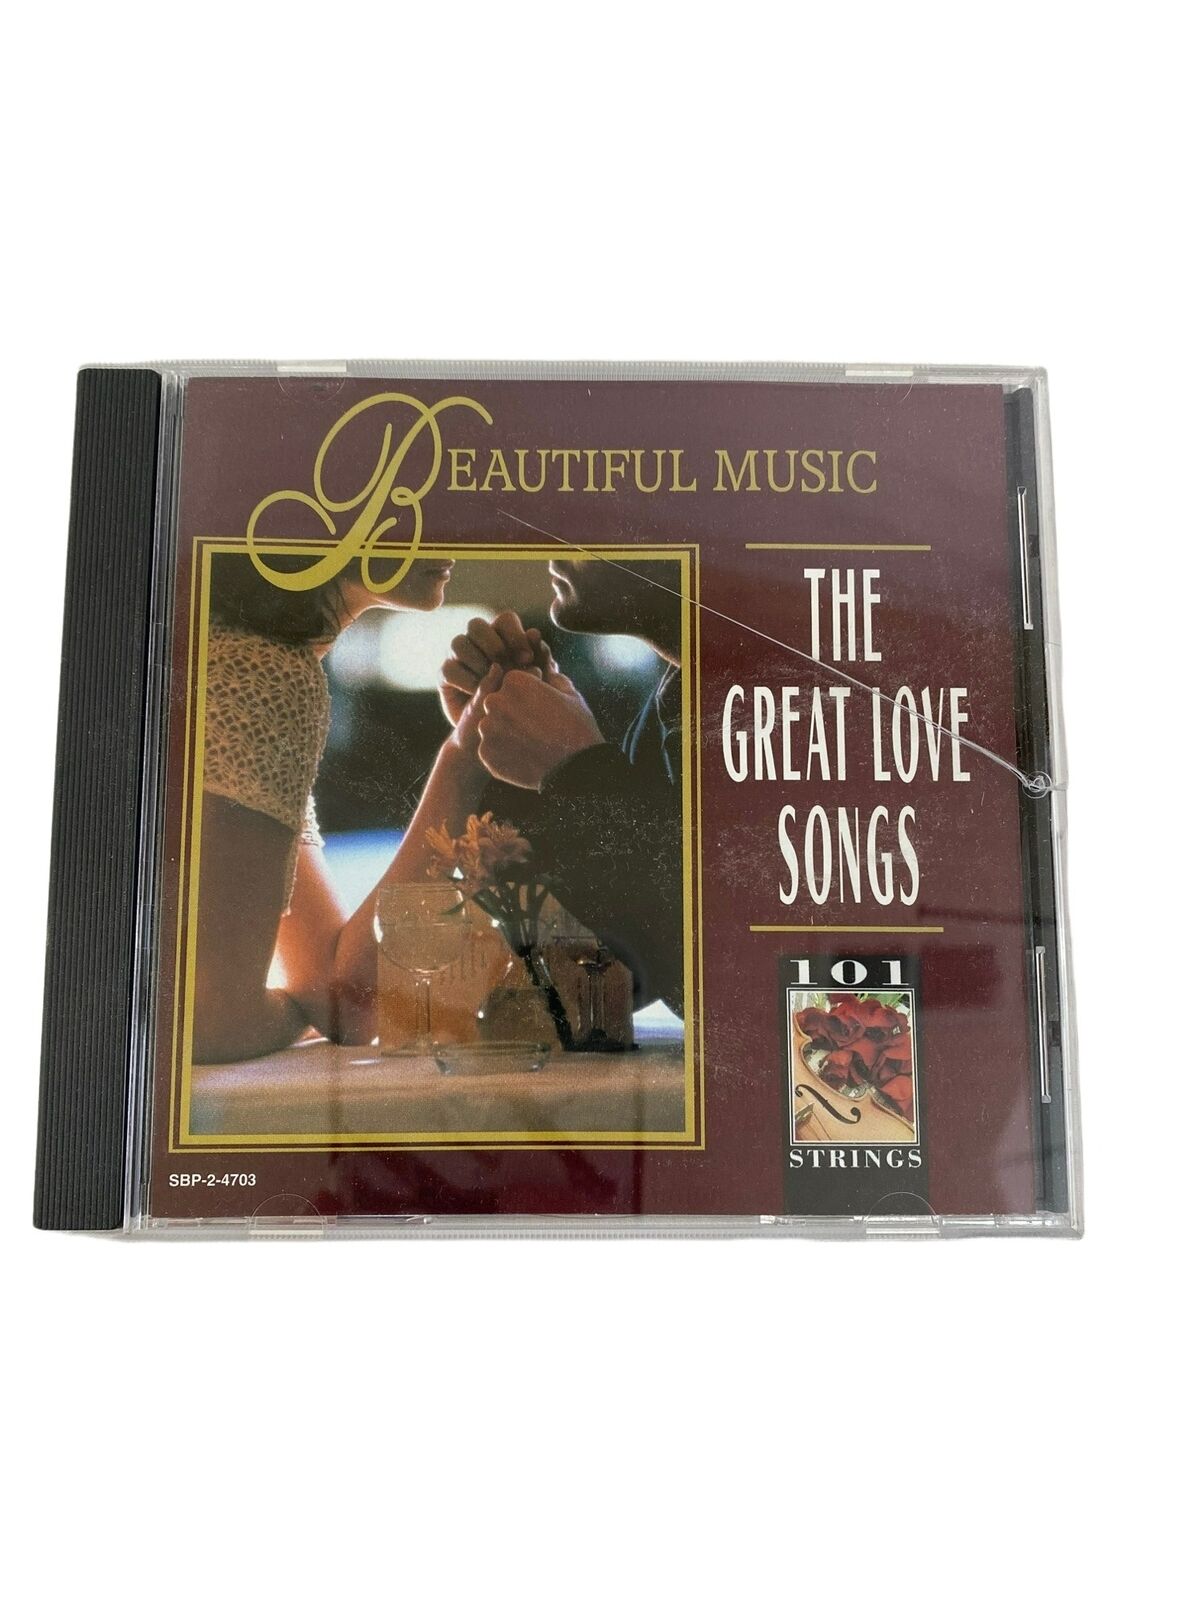 Vintage beautiful music the great love songs music CD